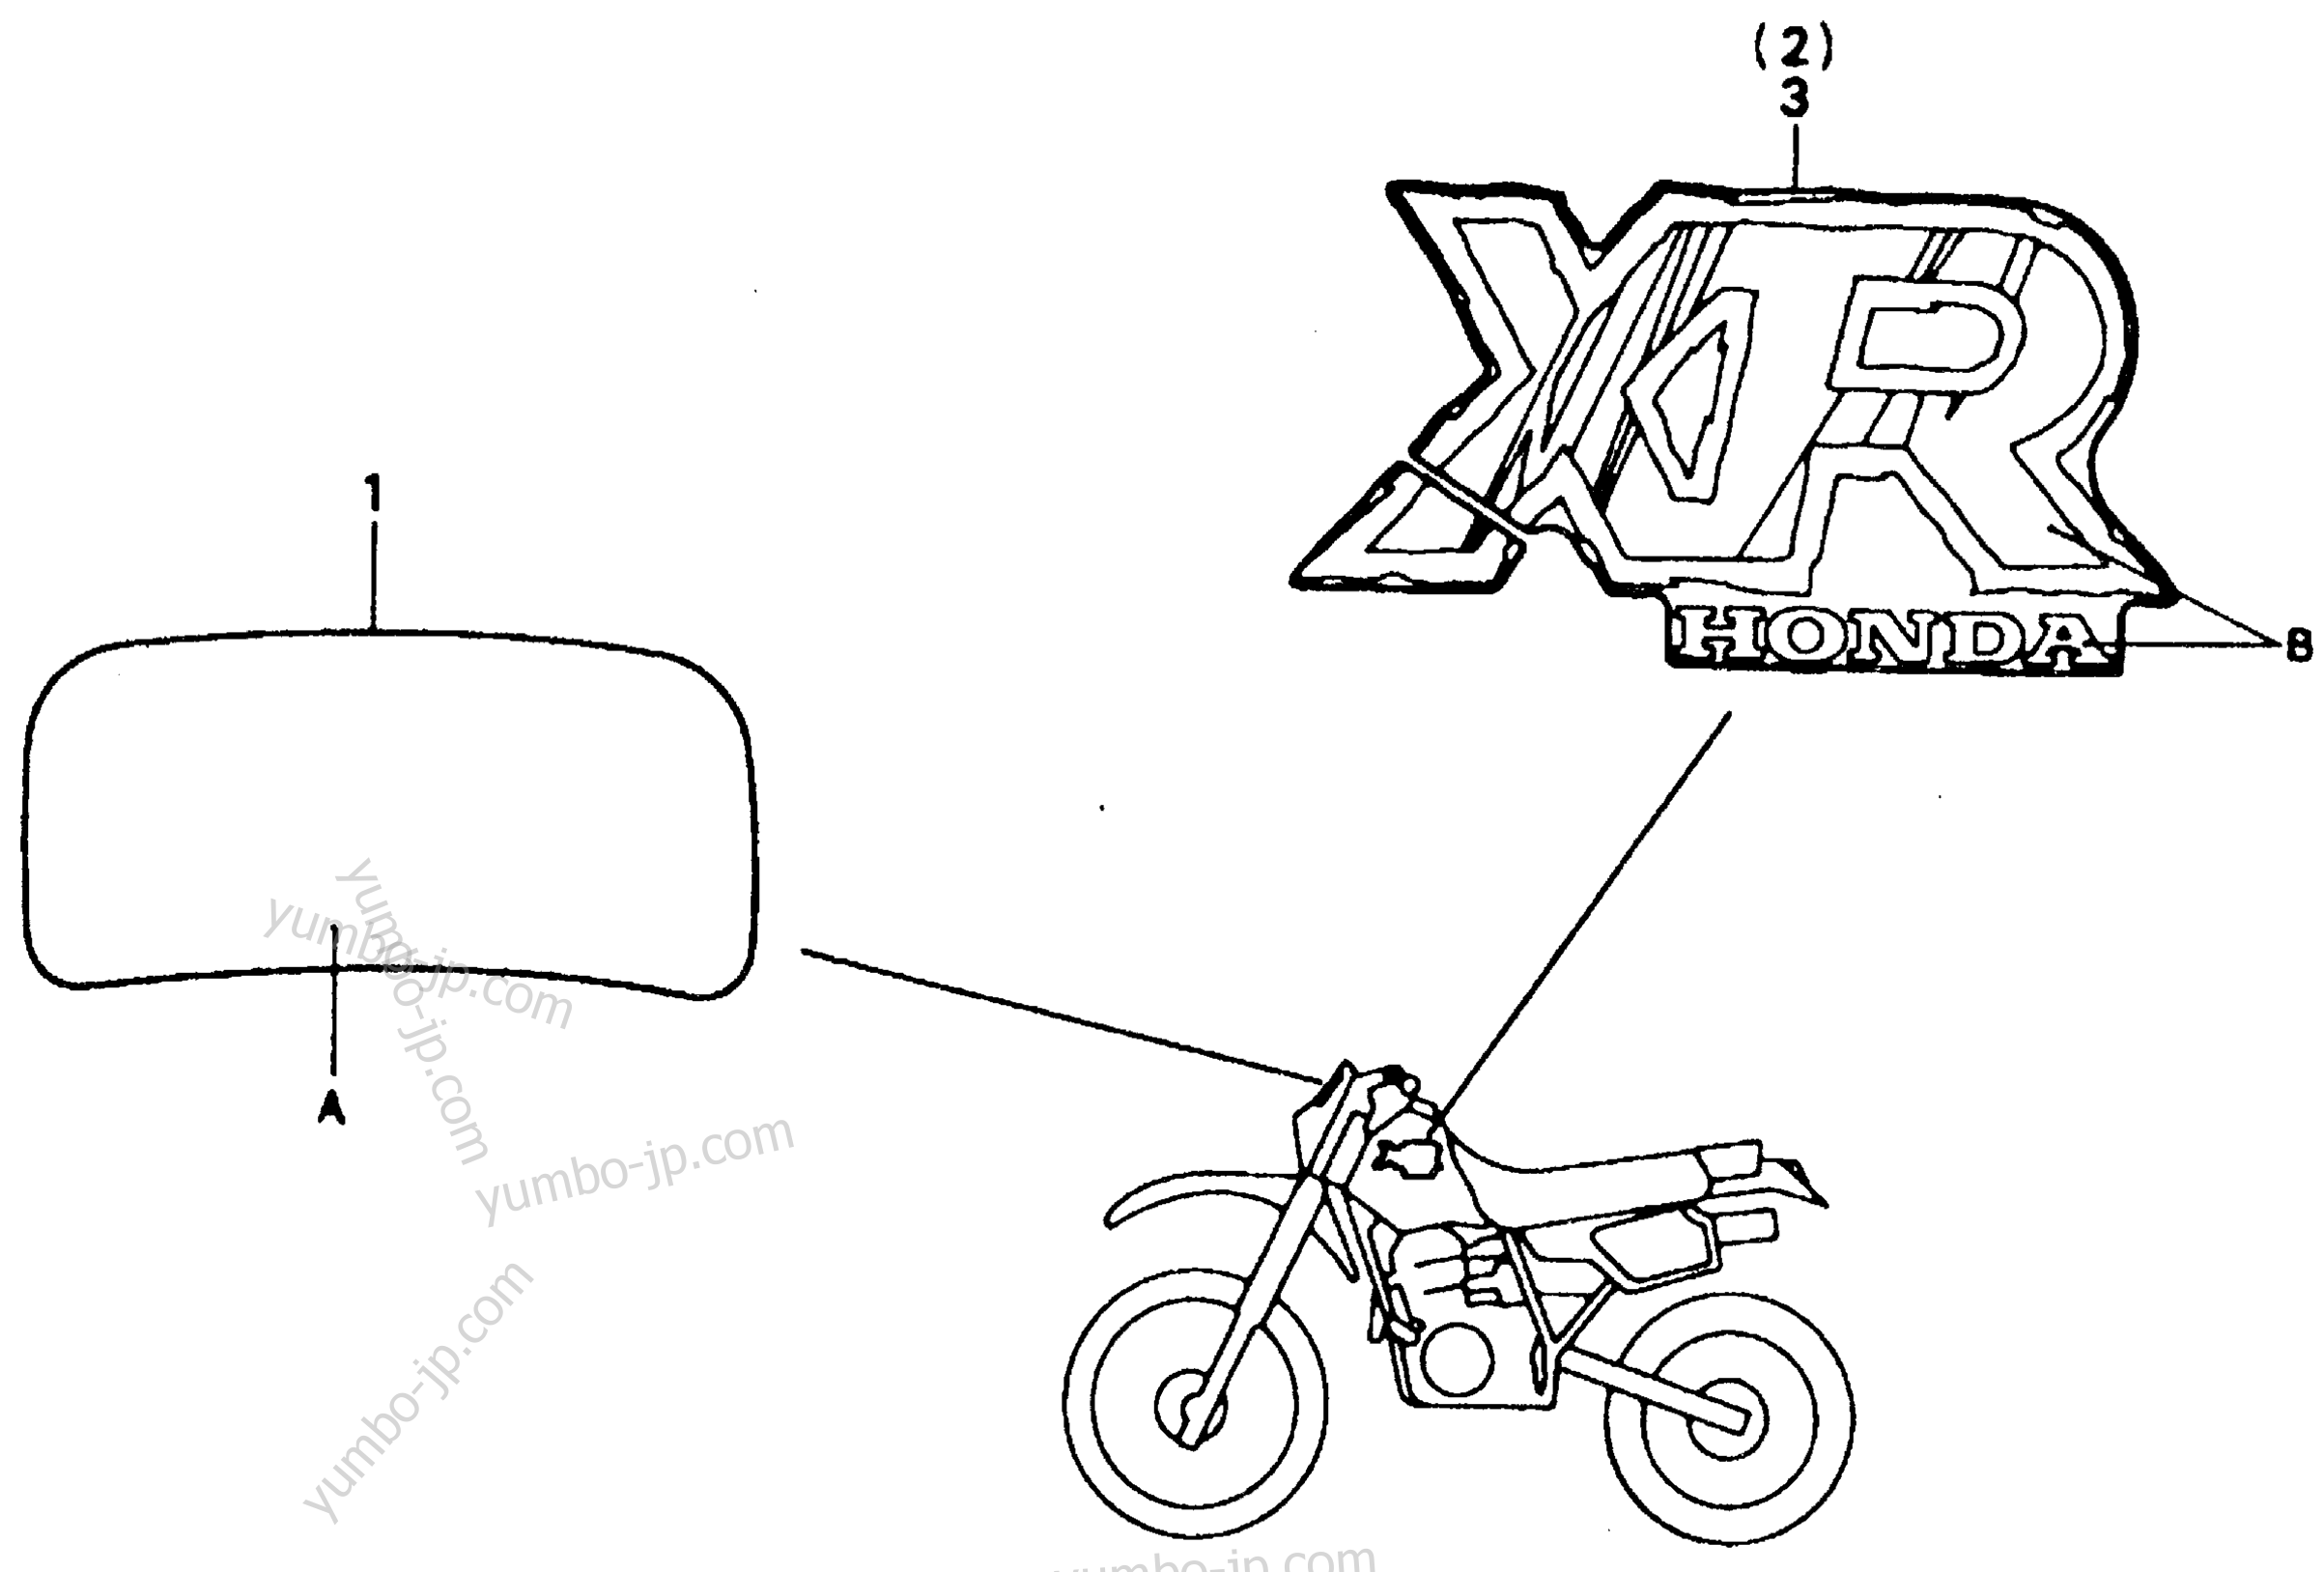 MARK for motorcycles HONDA XR600R A 1992 year